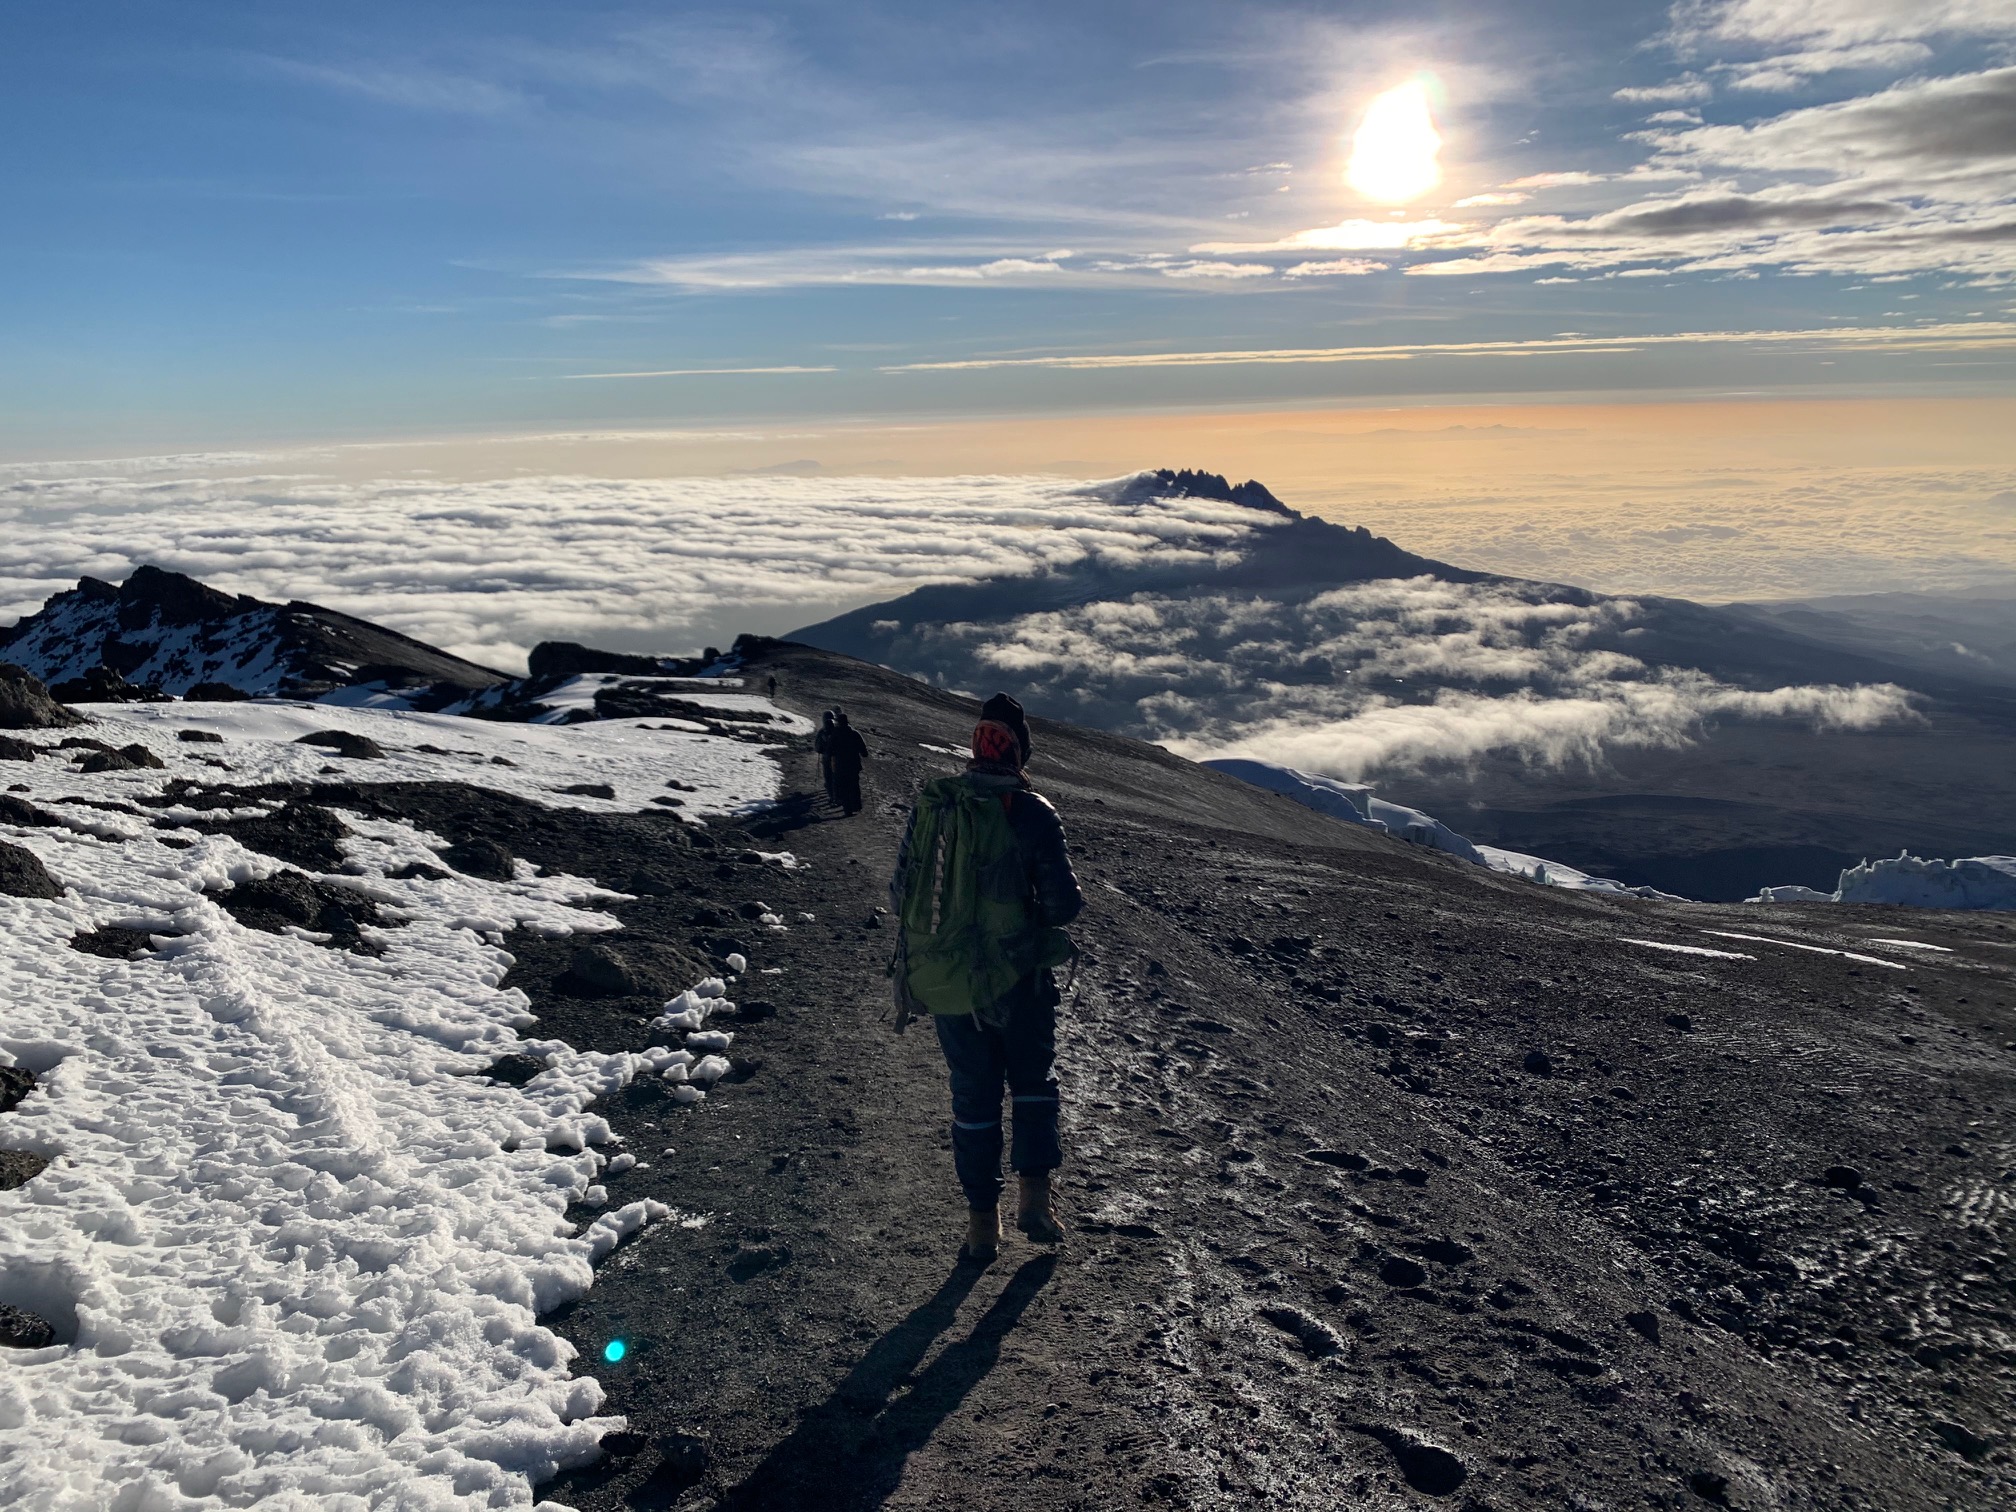 Hiking down from the summit of Kilimanjaro